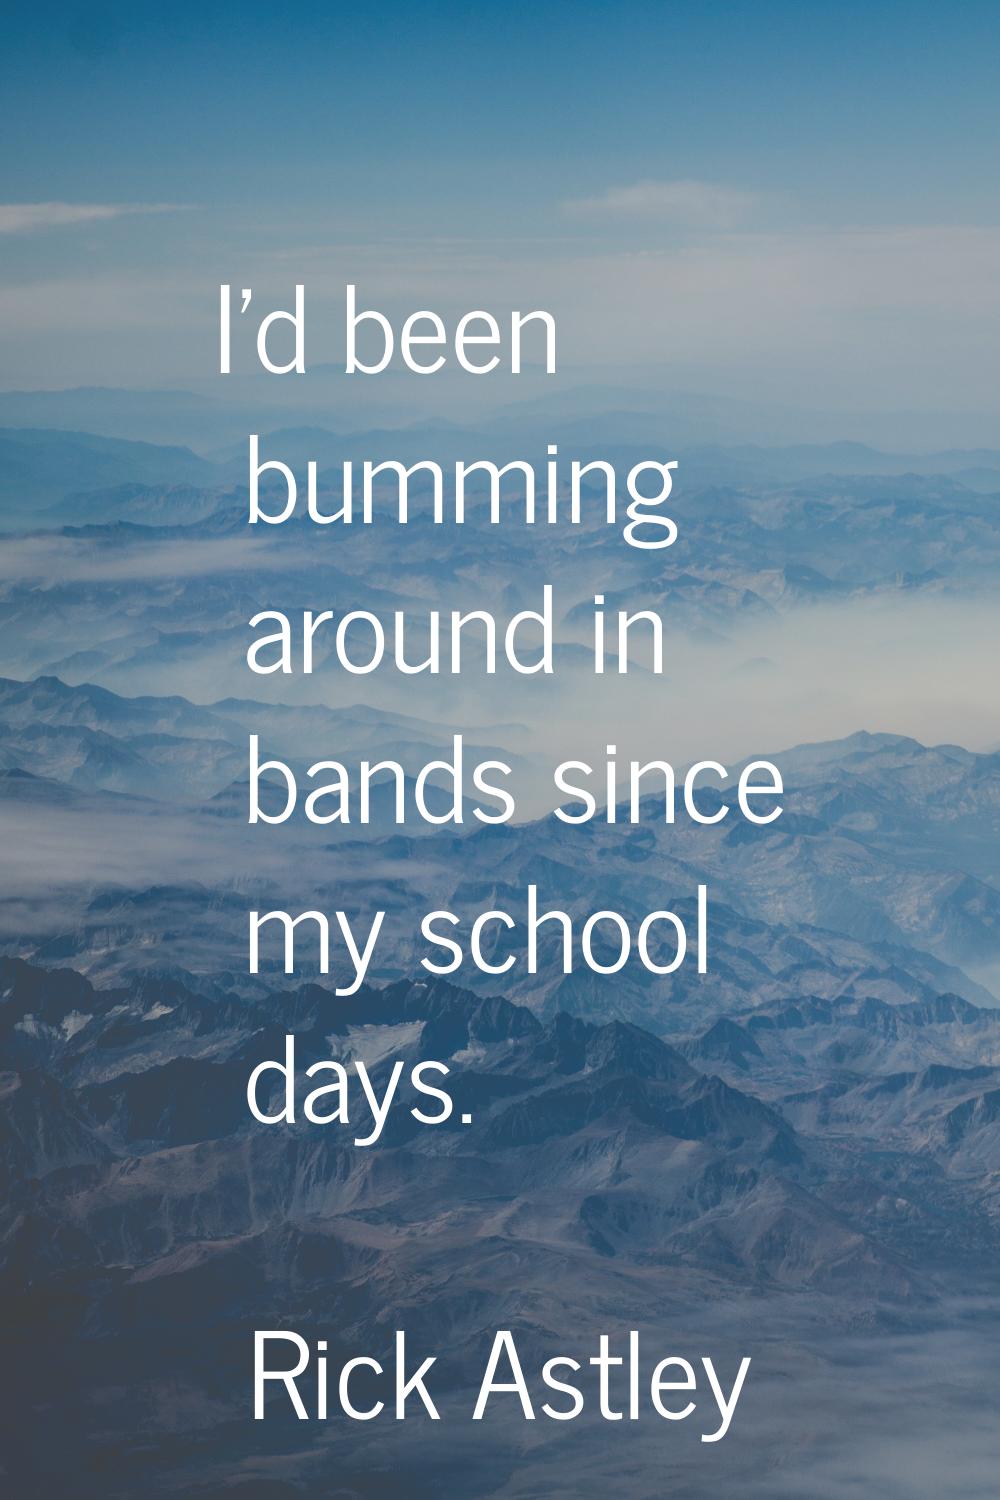 I'd been bumming around in bands since my school days.